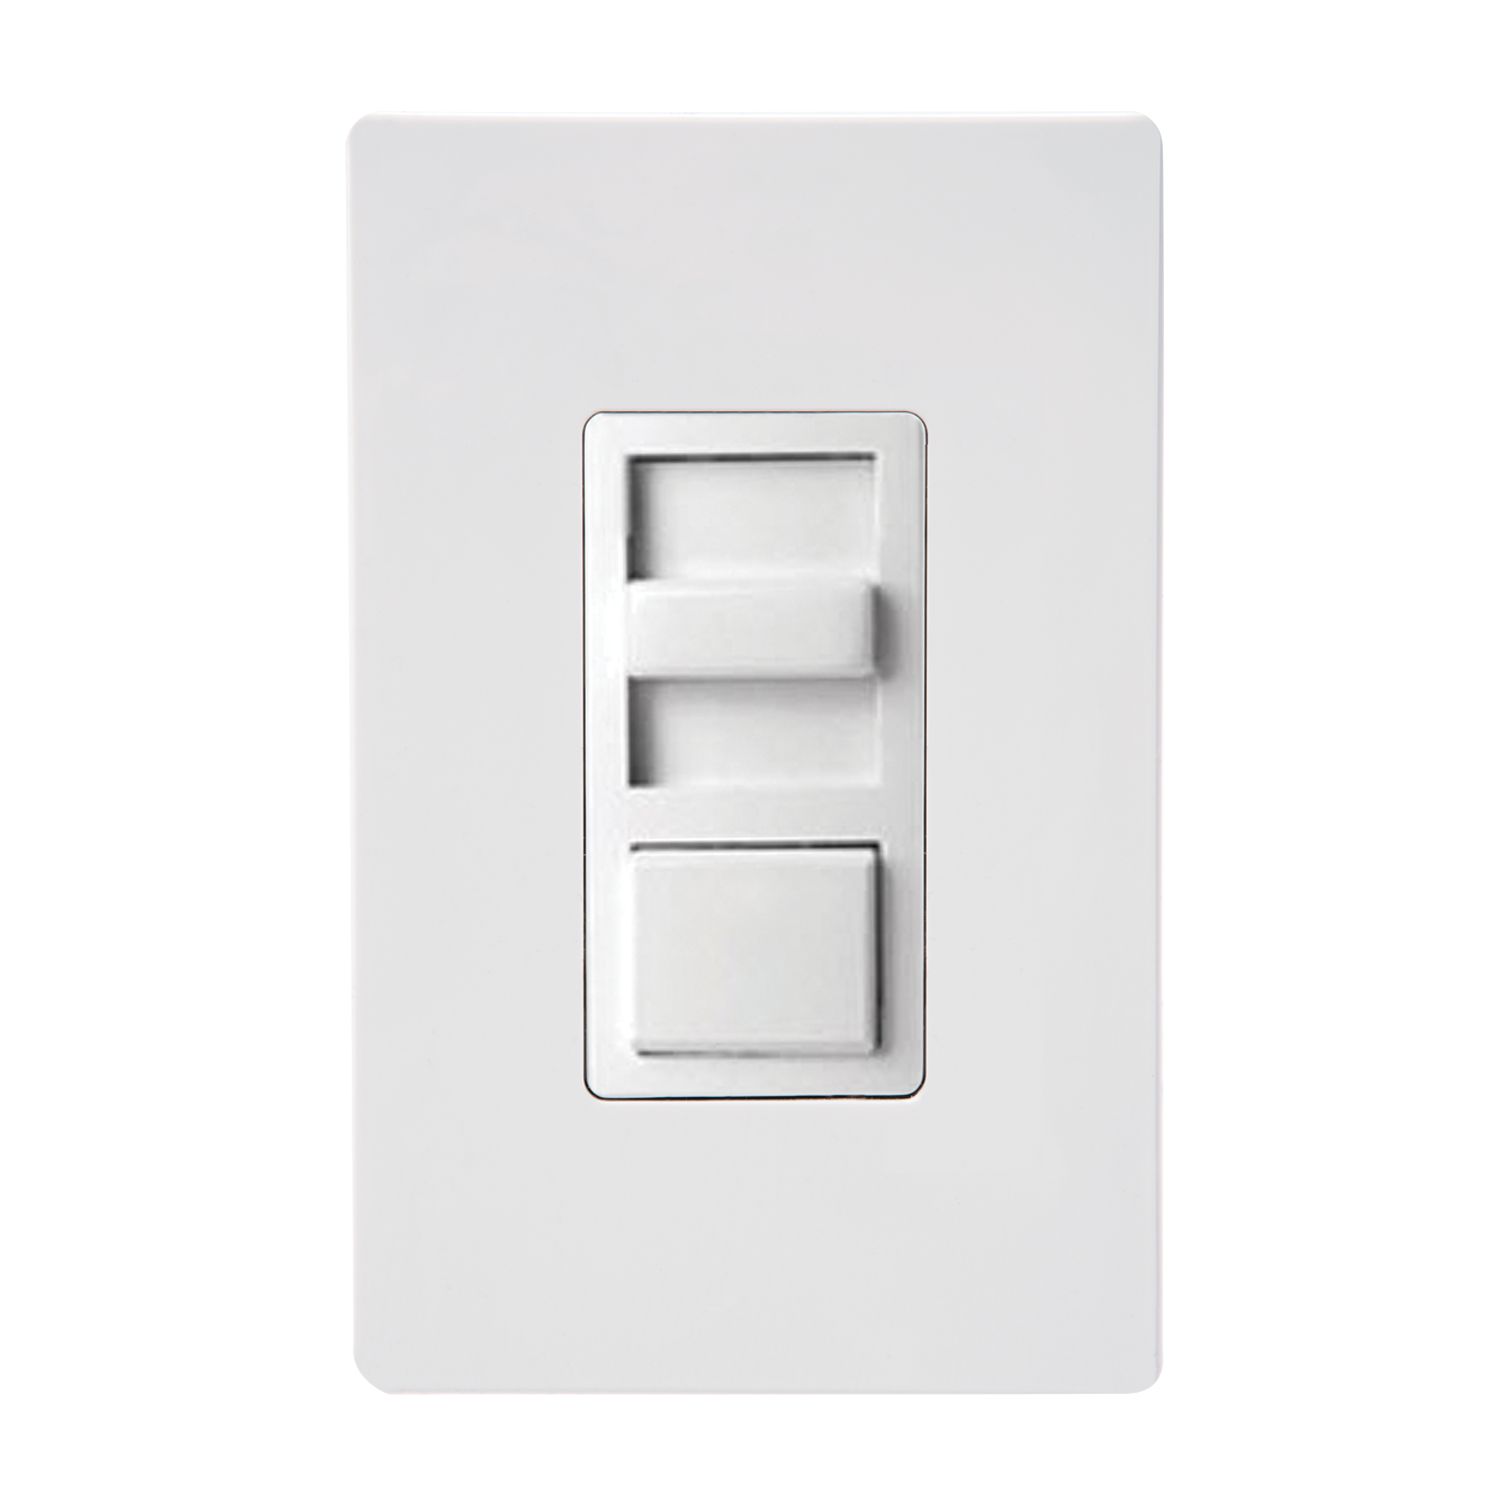 SLIDE DIMMER WITH MOMENTARY PUSH BUTTON